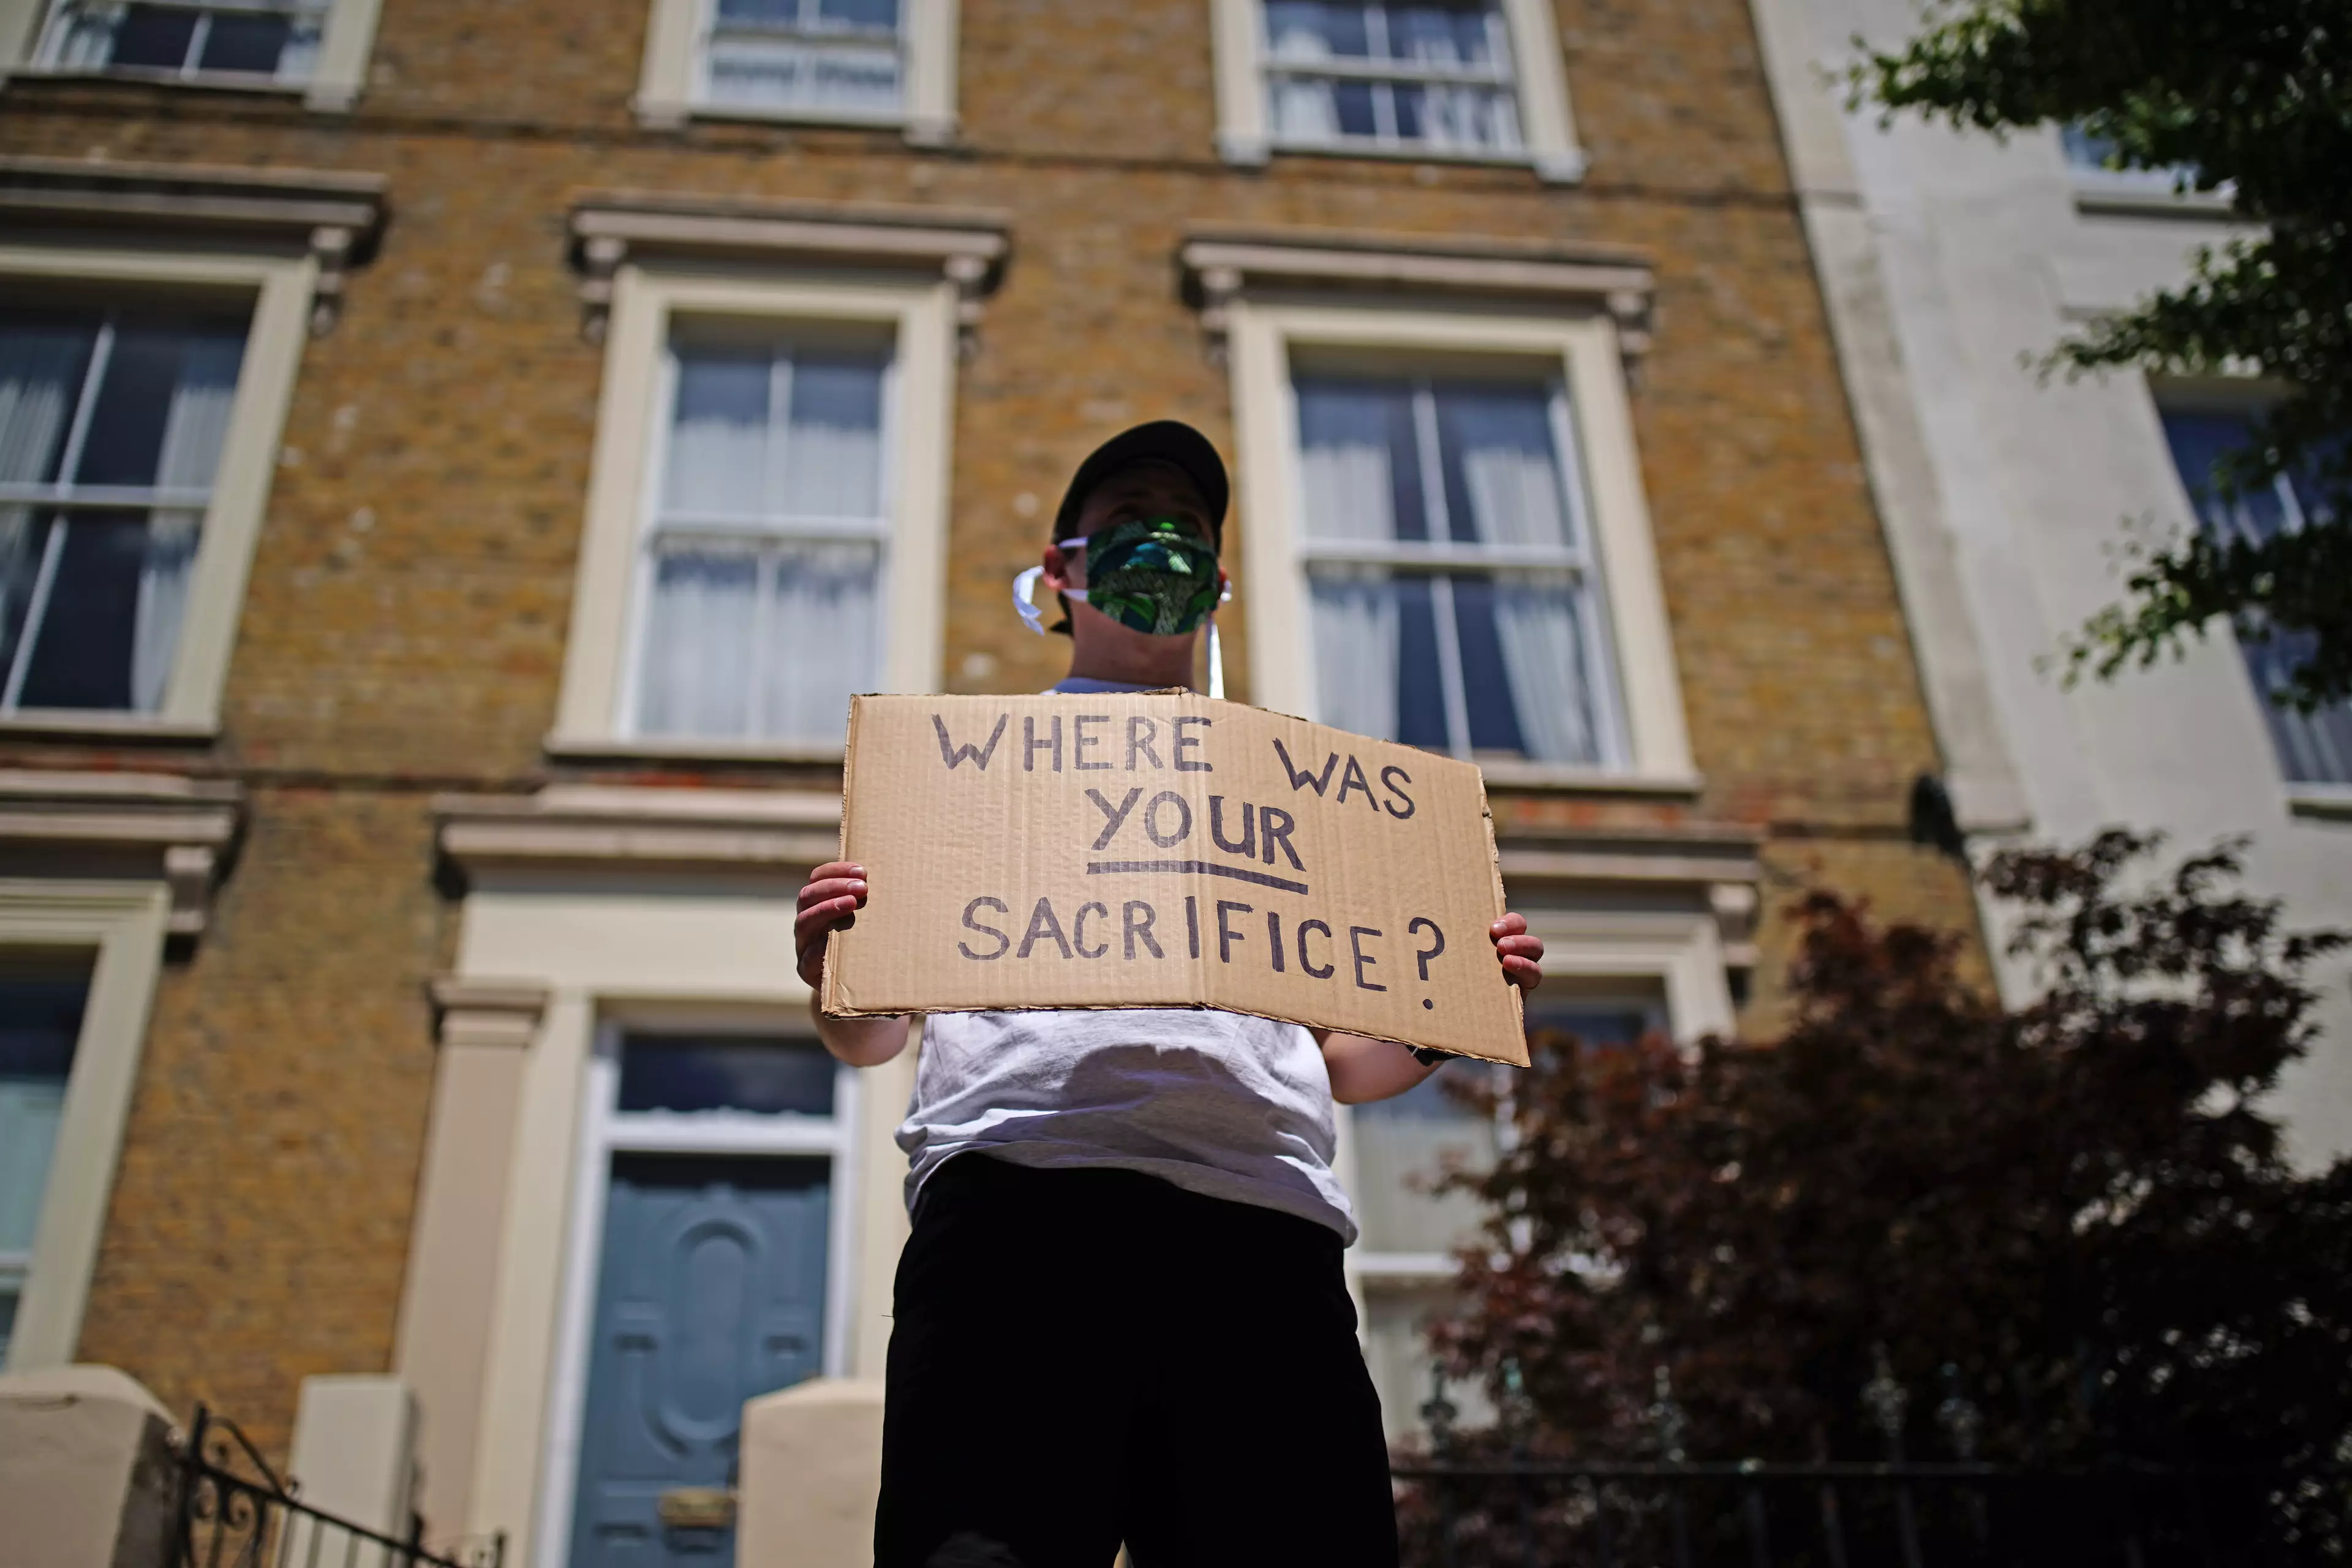 A protester with a sign outside Dominic Cummings' house.